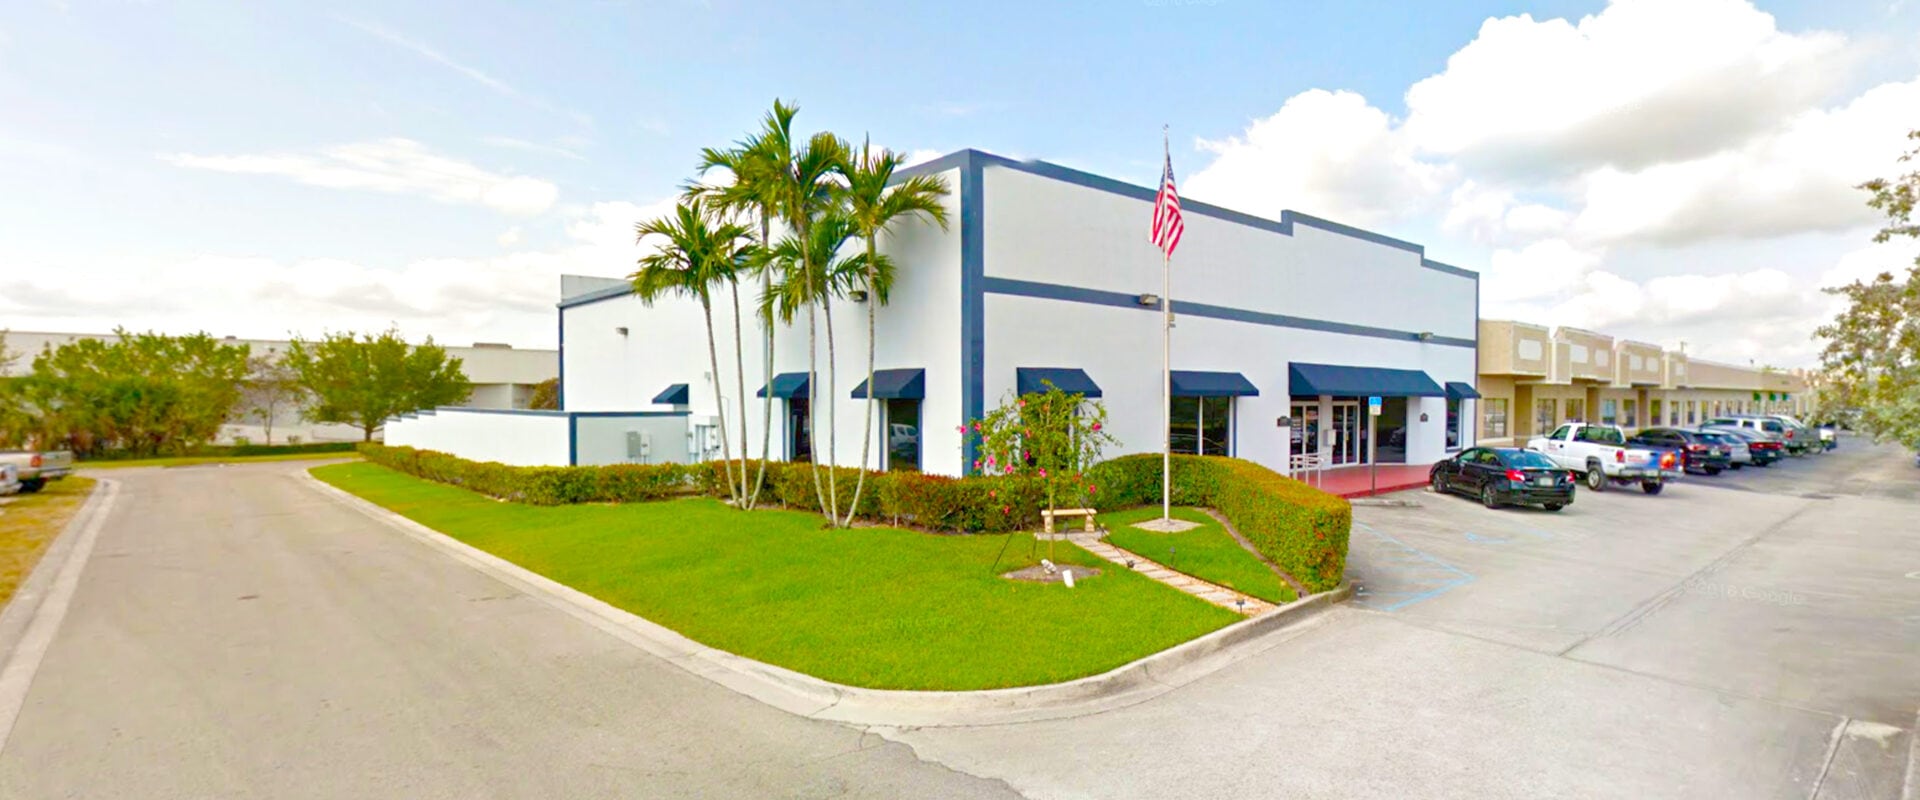 For Lease Office / Warehouse 9,200 SF – Coral Springs